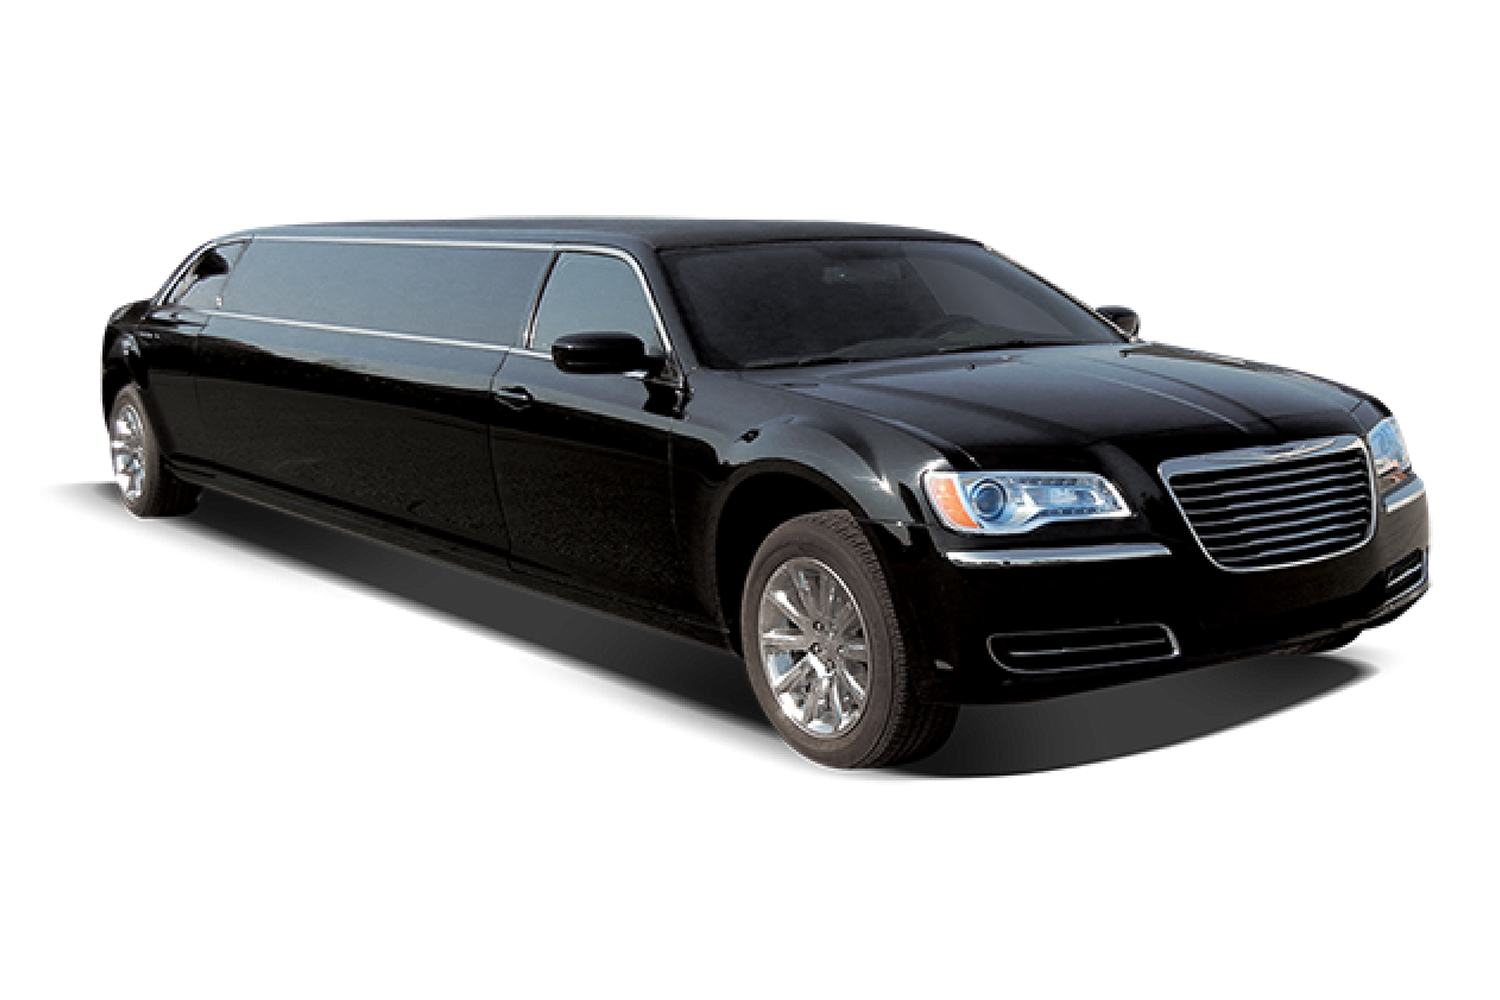 Chrysler 300 Stretch Limousine Driven Global Chauffeured